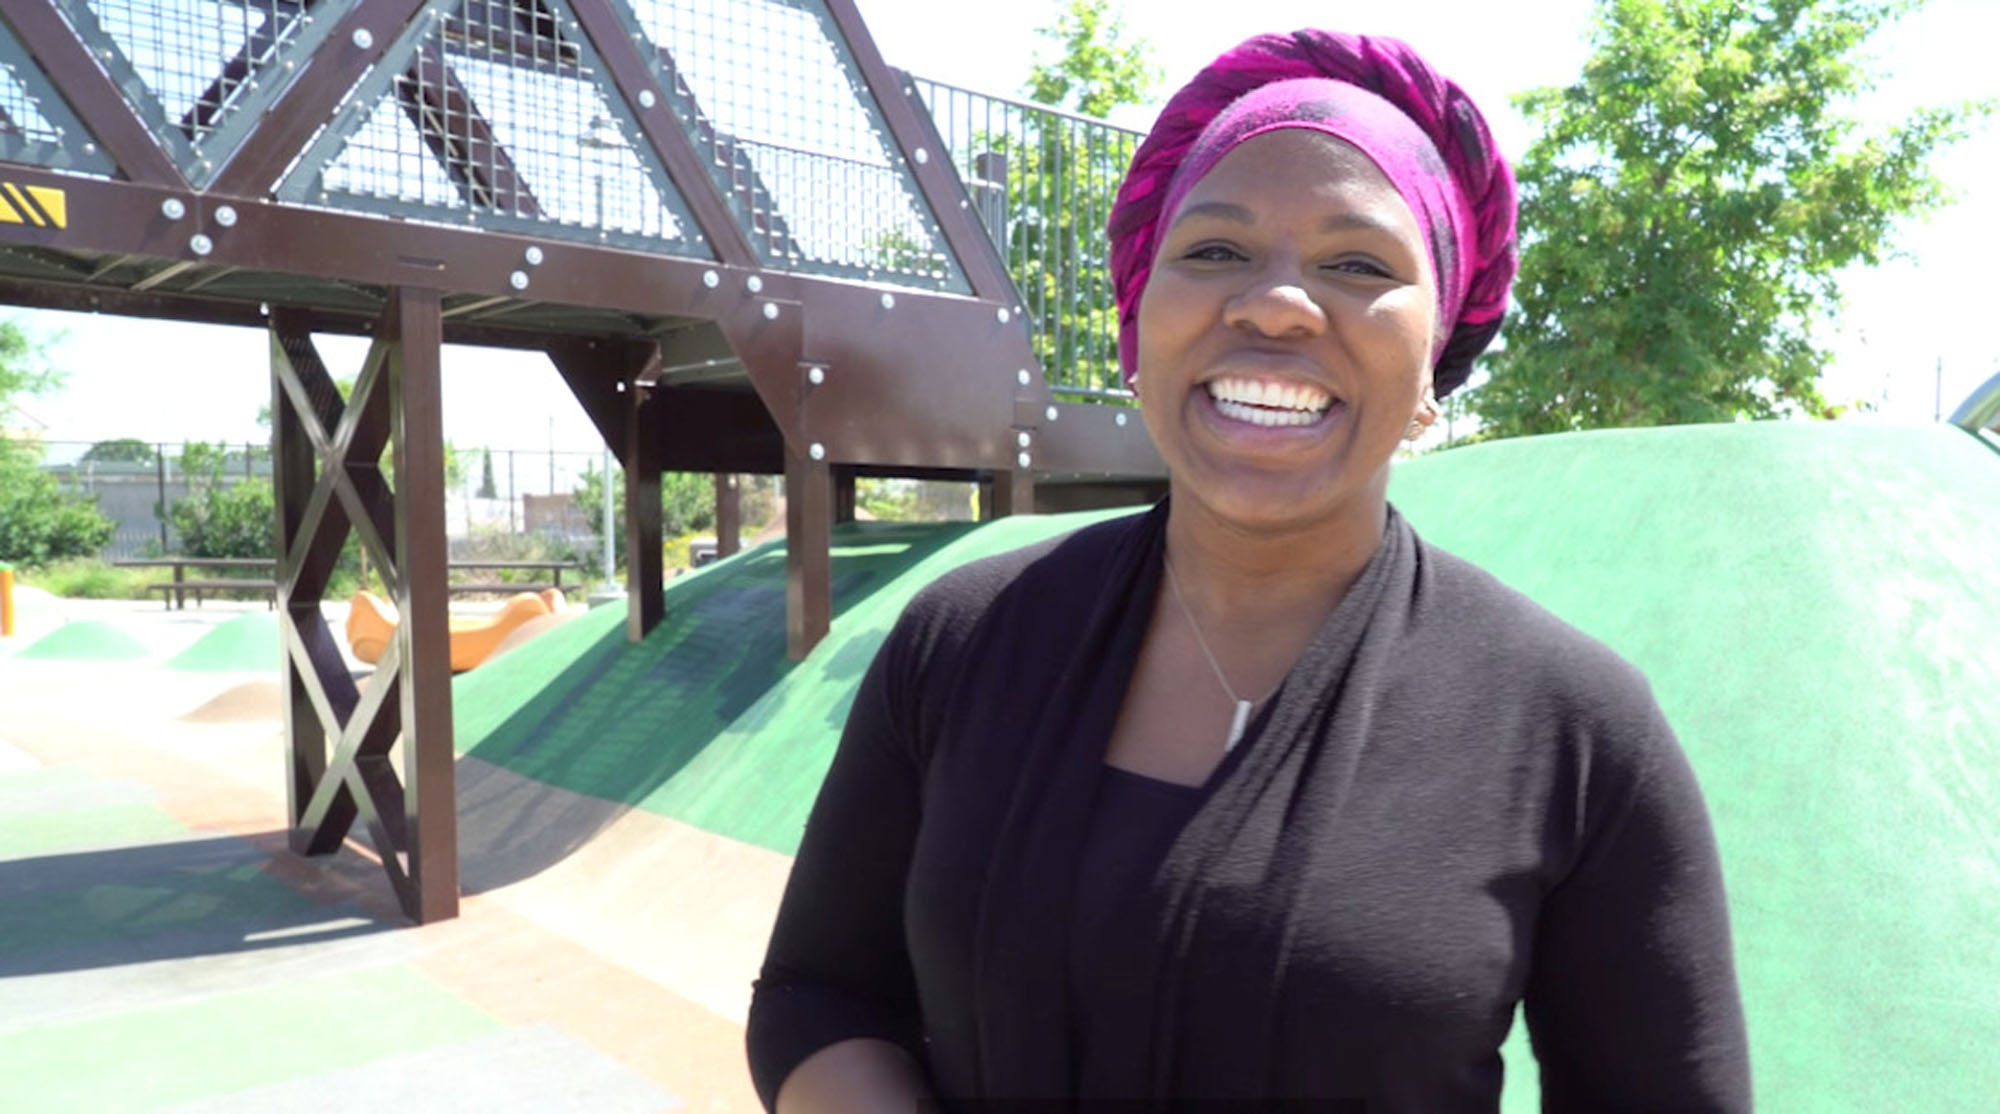 A smiling woman posing for a photo standing in a play area with a pedestrian bridge behind her